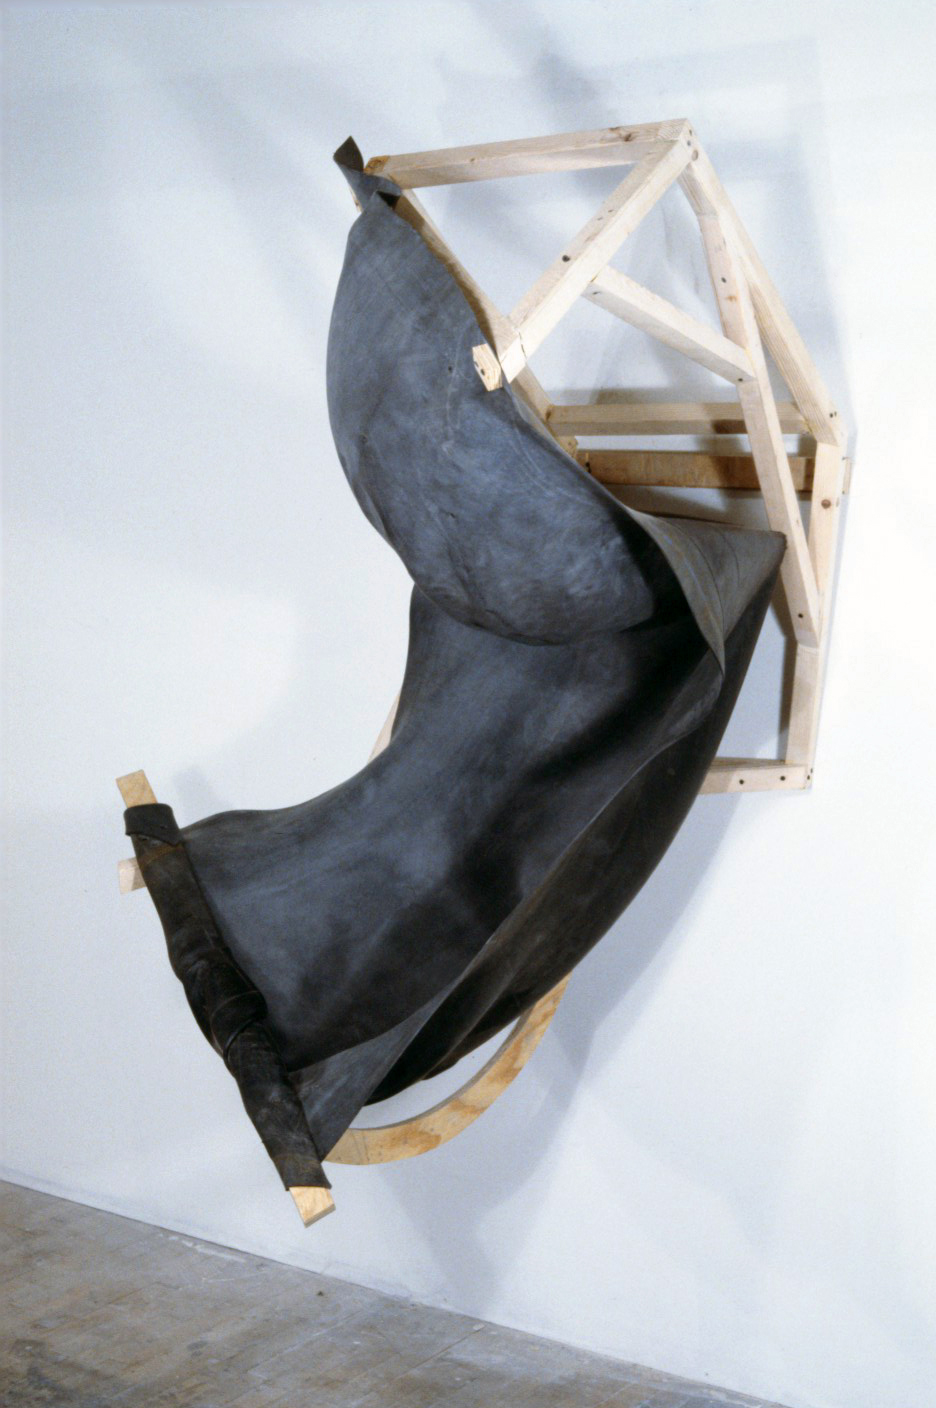   Chute   1988  rubber and wood  59 X 37 X 45"   